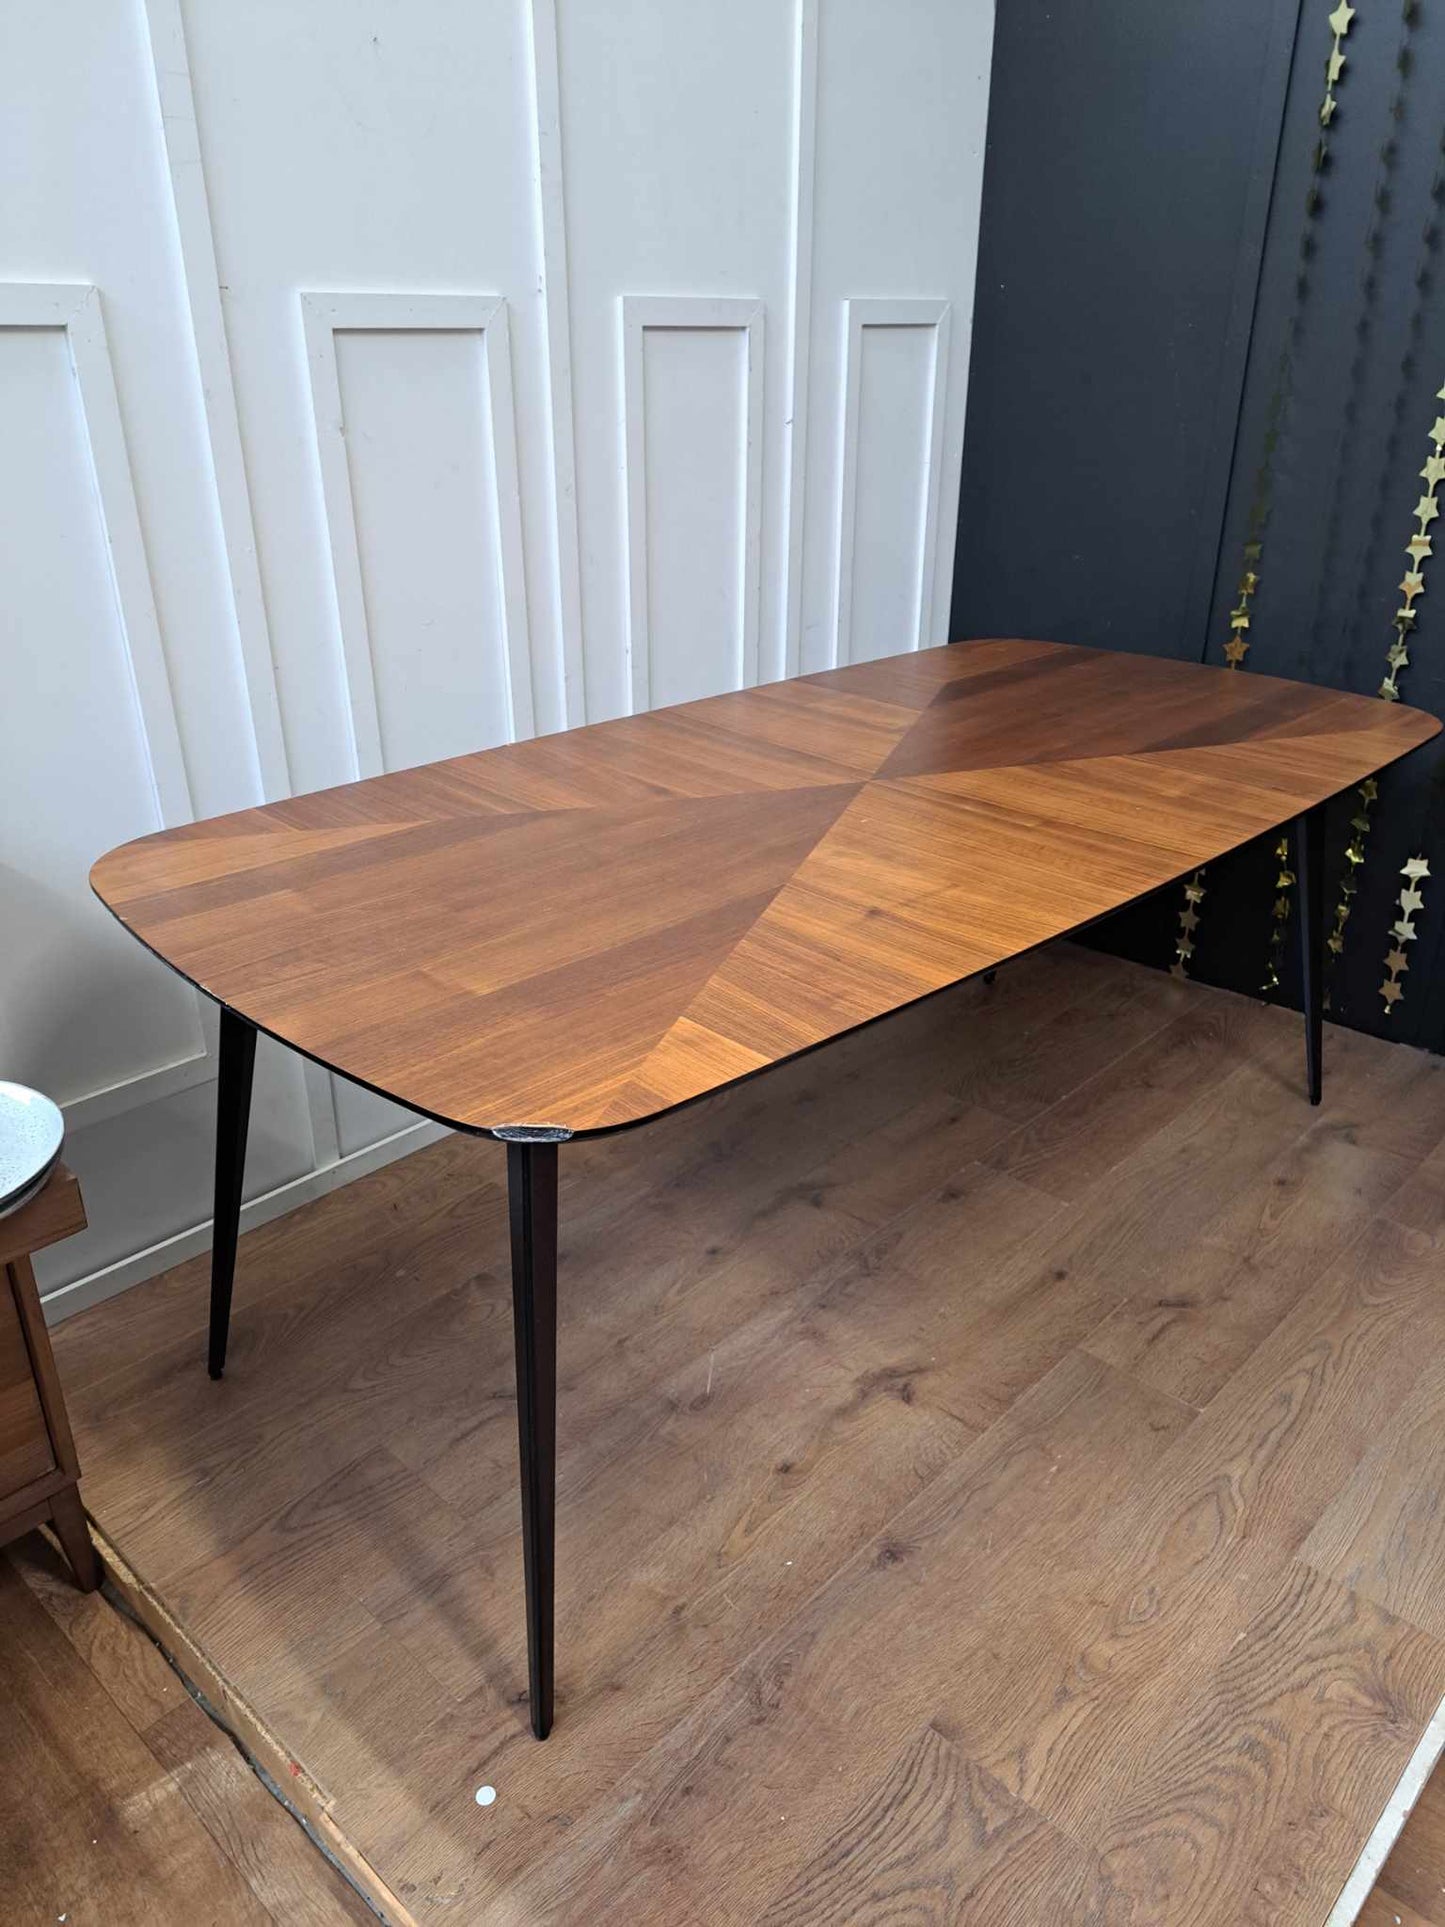 Dining Table extra large walnut black 50s industrial La Redoute Watford Vintage Inlaid Marquetry